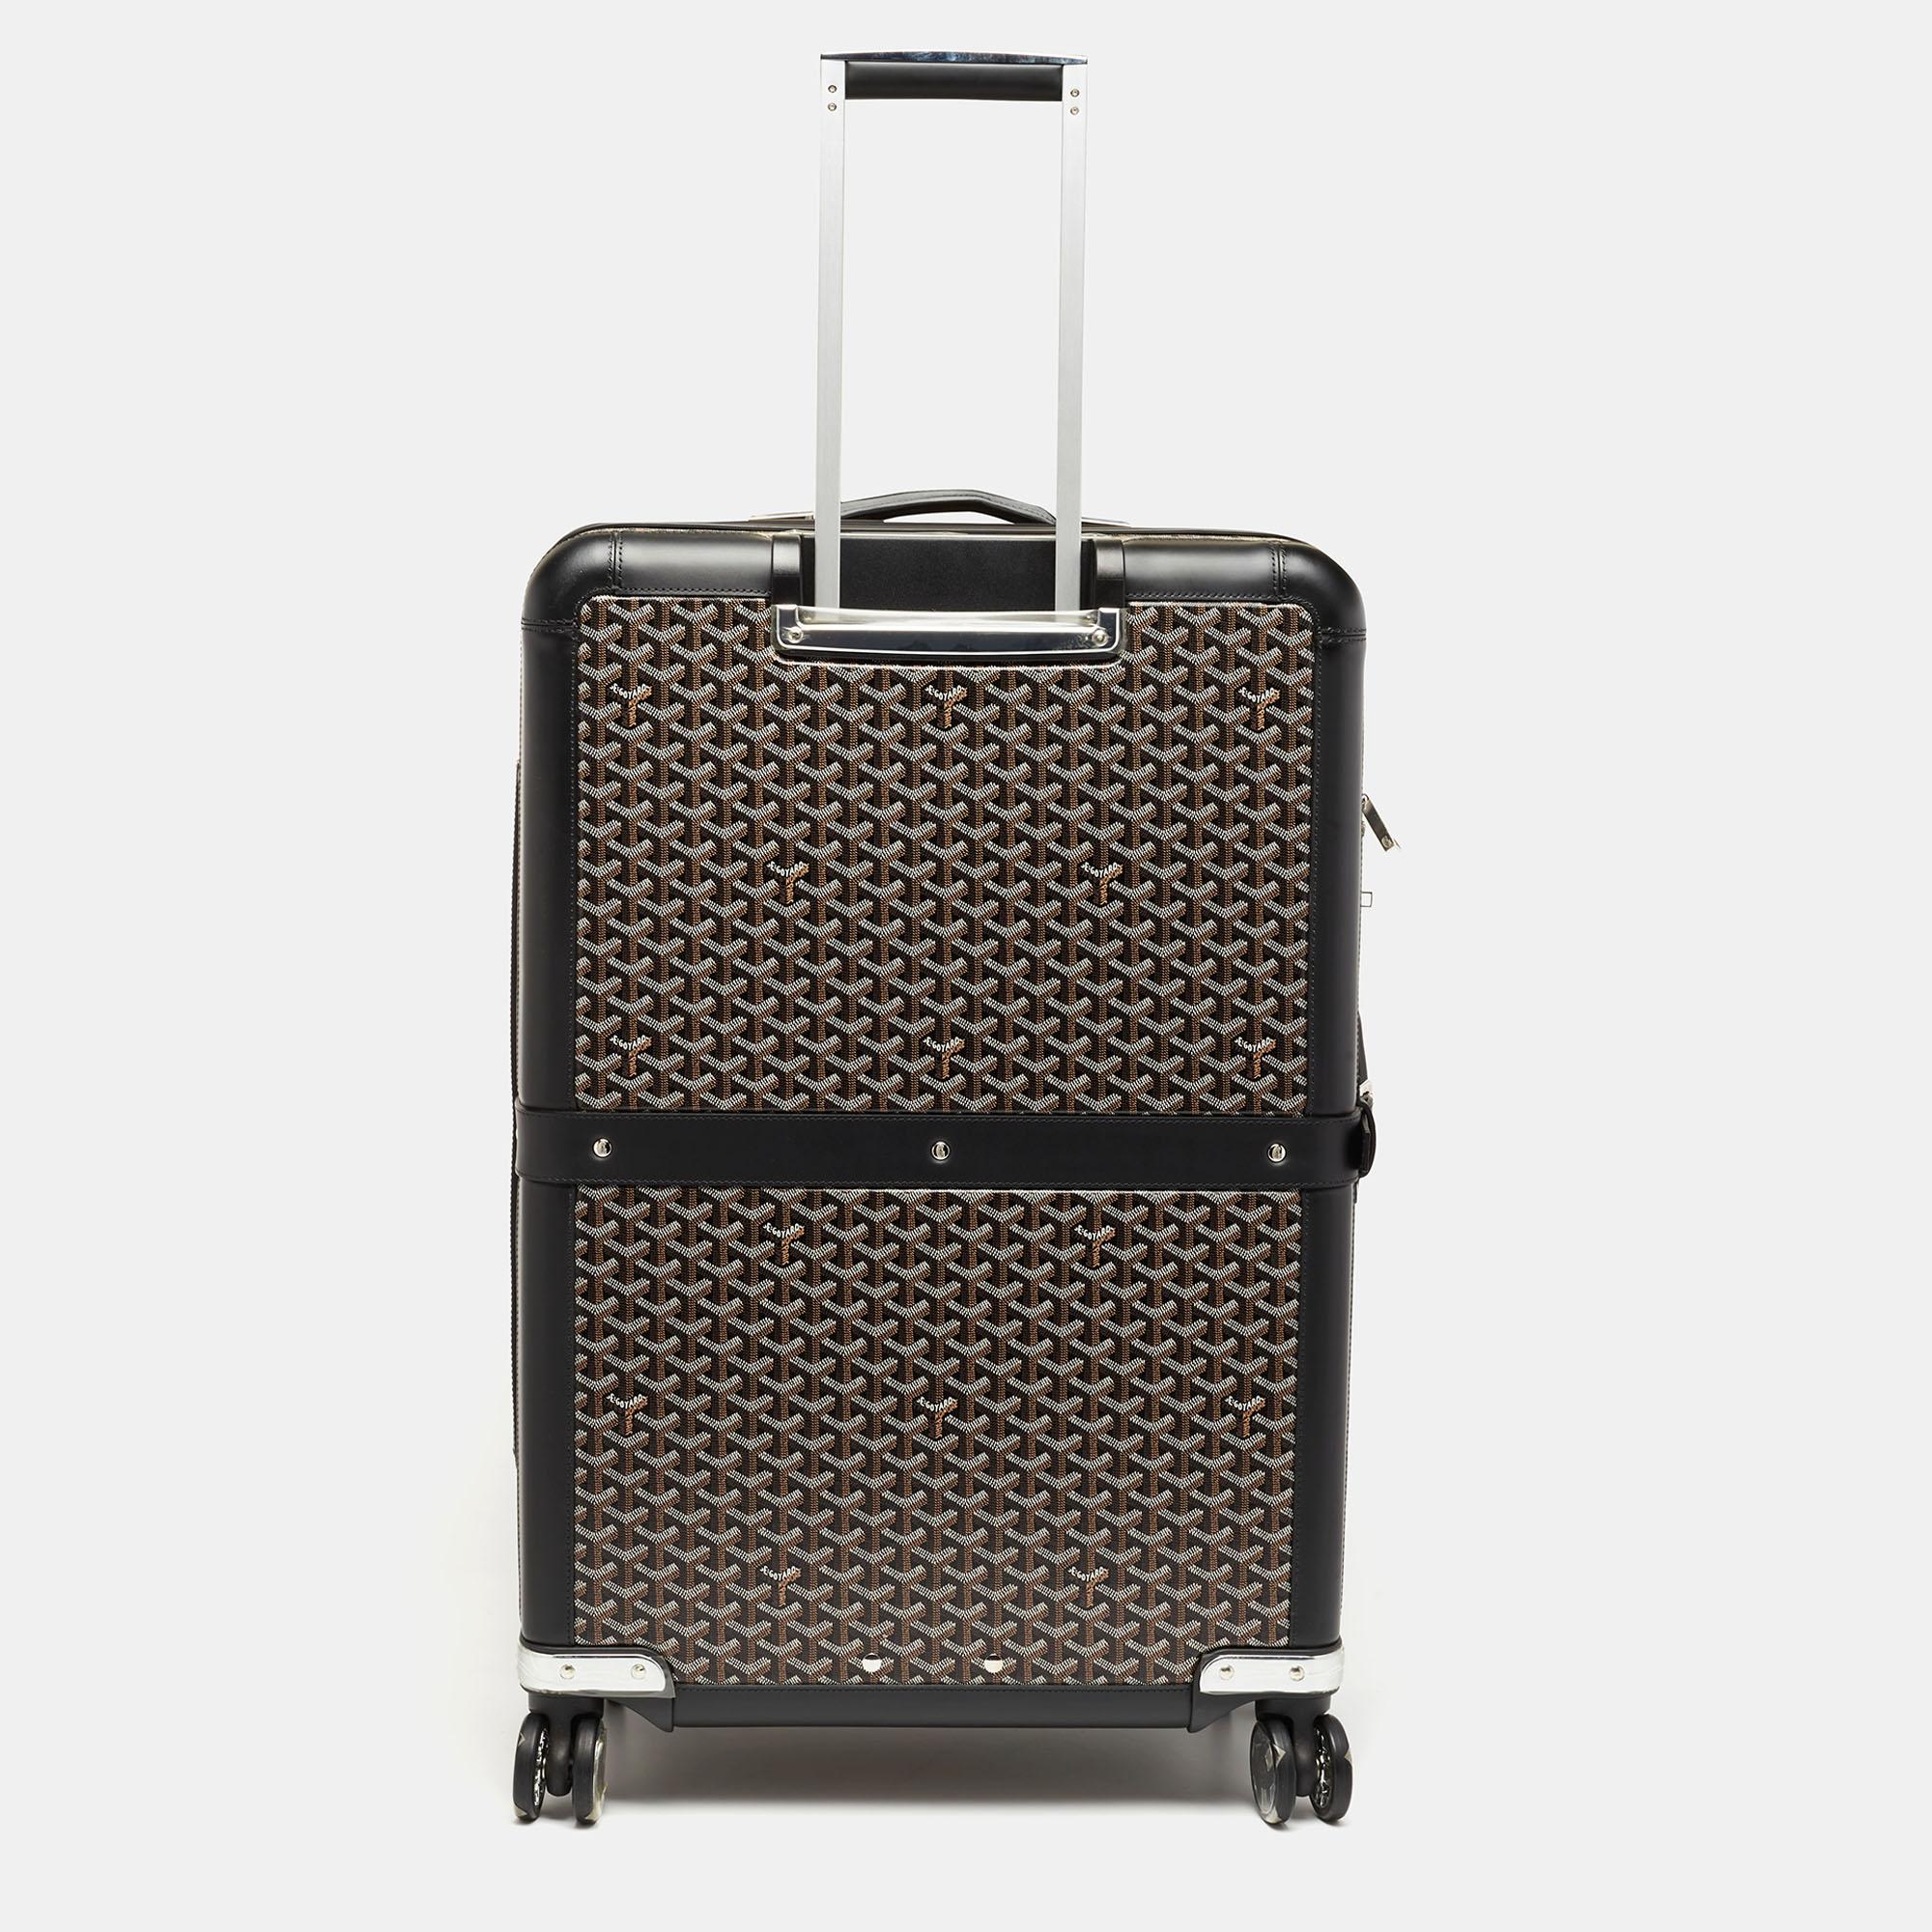 This Satolas GM Rolling suitcase from the House of Goyard is super sturdy, practical, and stylish for long vacations. Crafted from black Goyardine canvas, this suitcase displays silver-tone fittings, a sturdy trolley handle, and a spacious lined